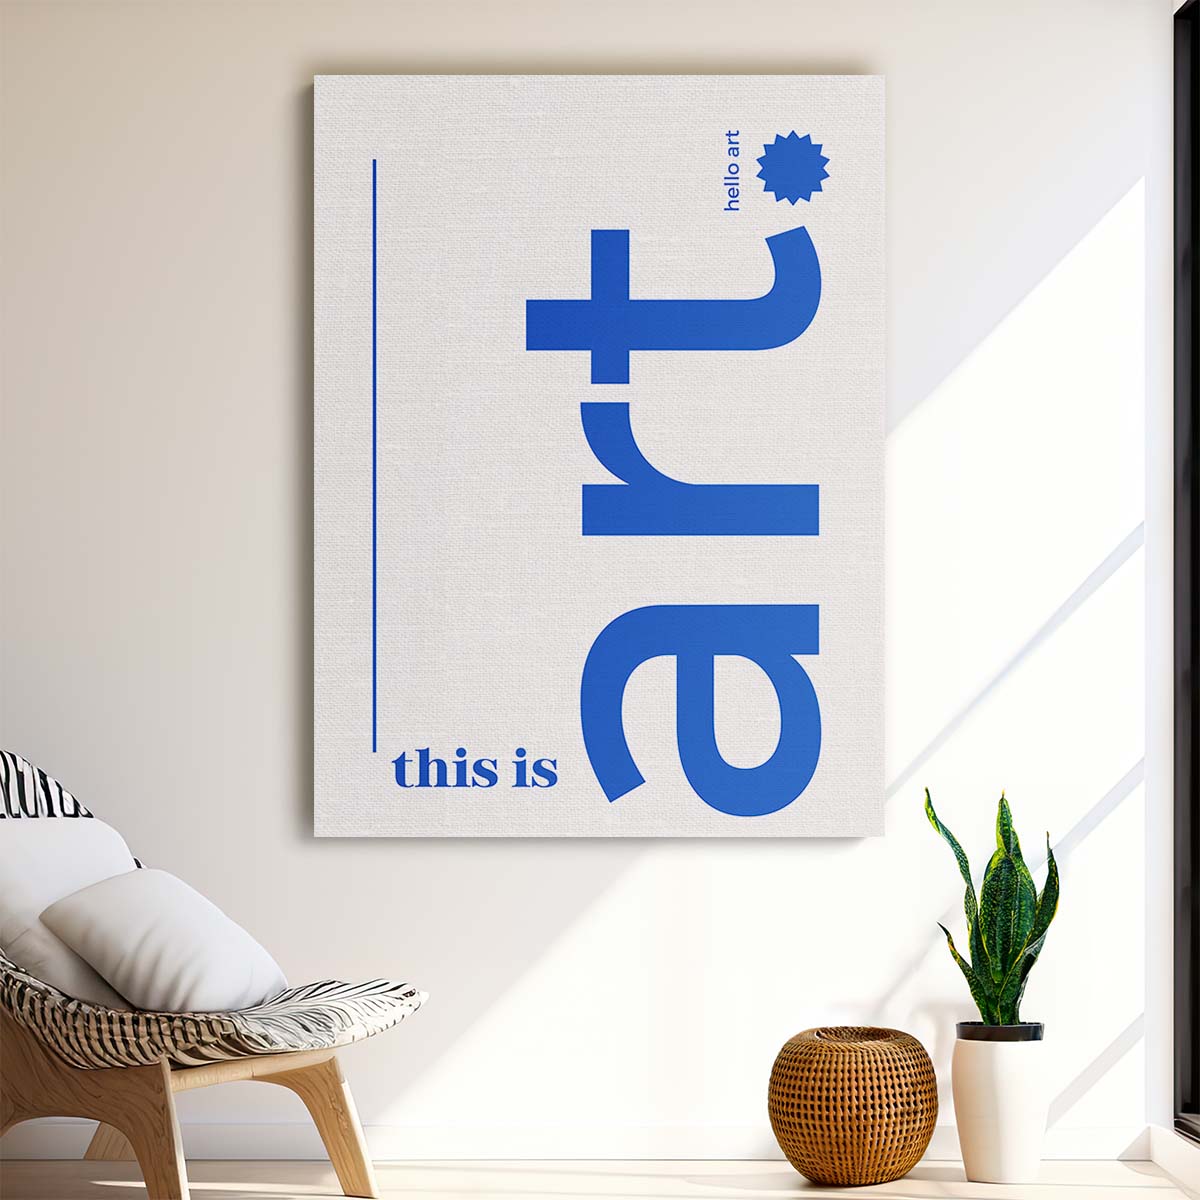 Inspirational Text Illustration Art Poster on Bright White Background by Luxuriance Designs, made in USA